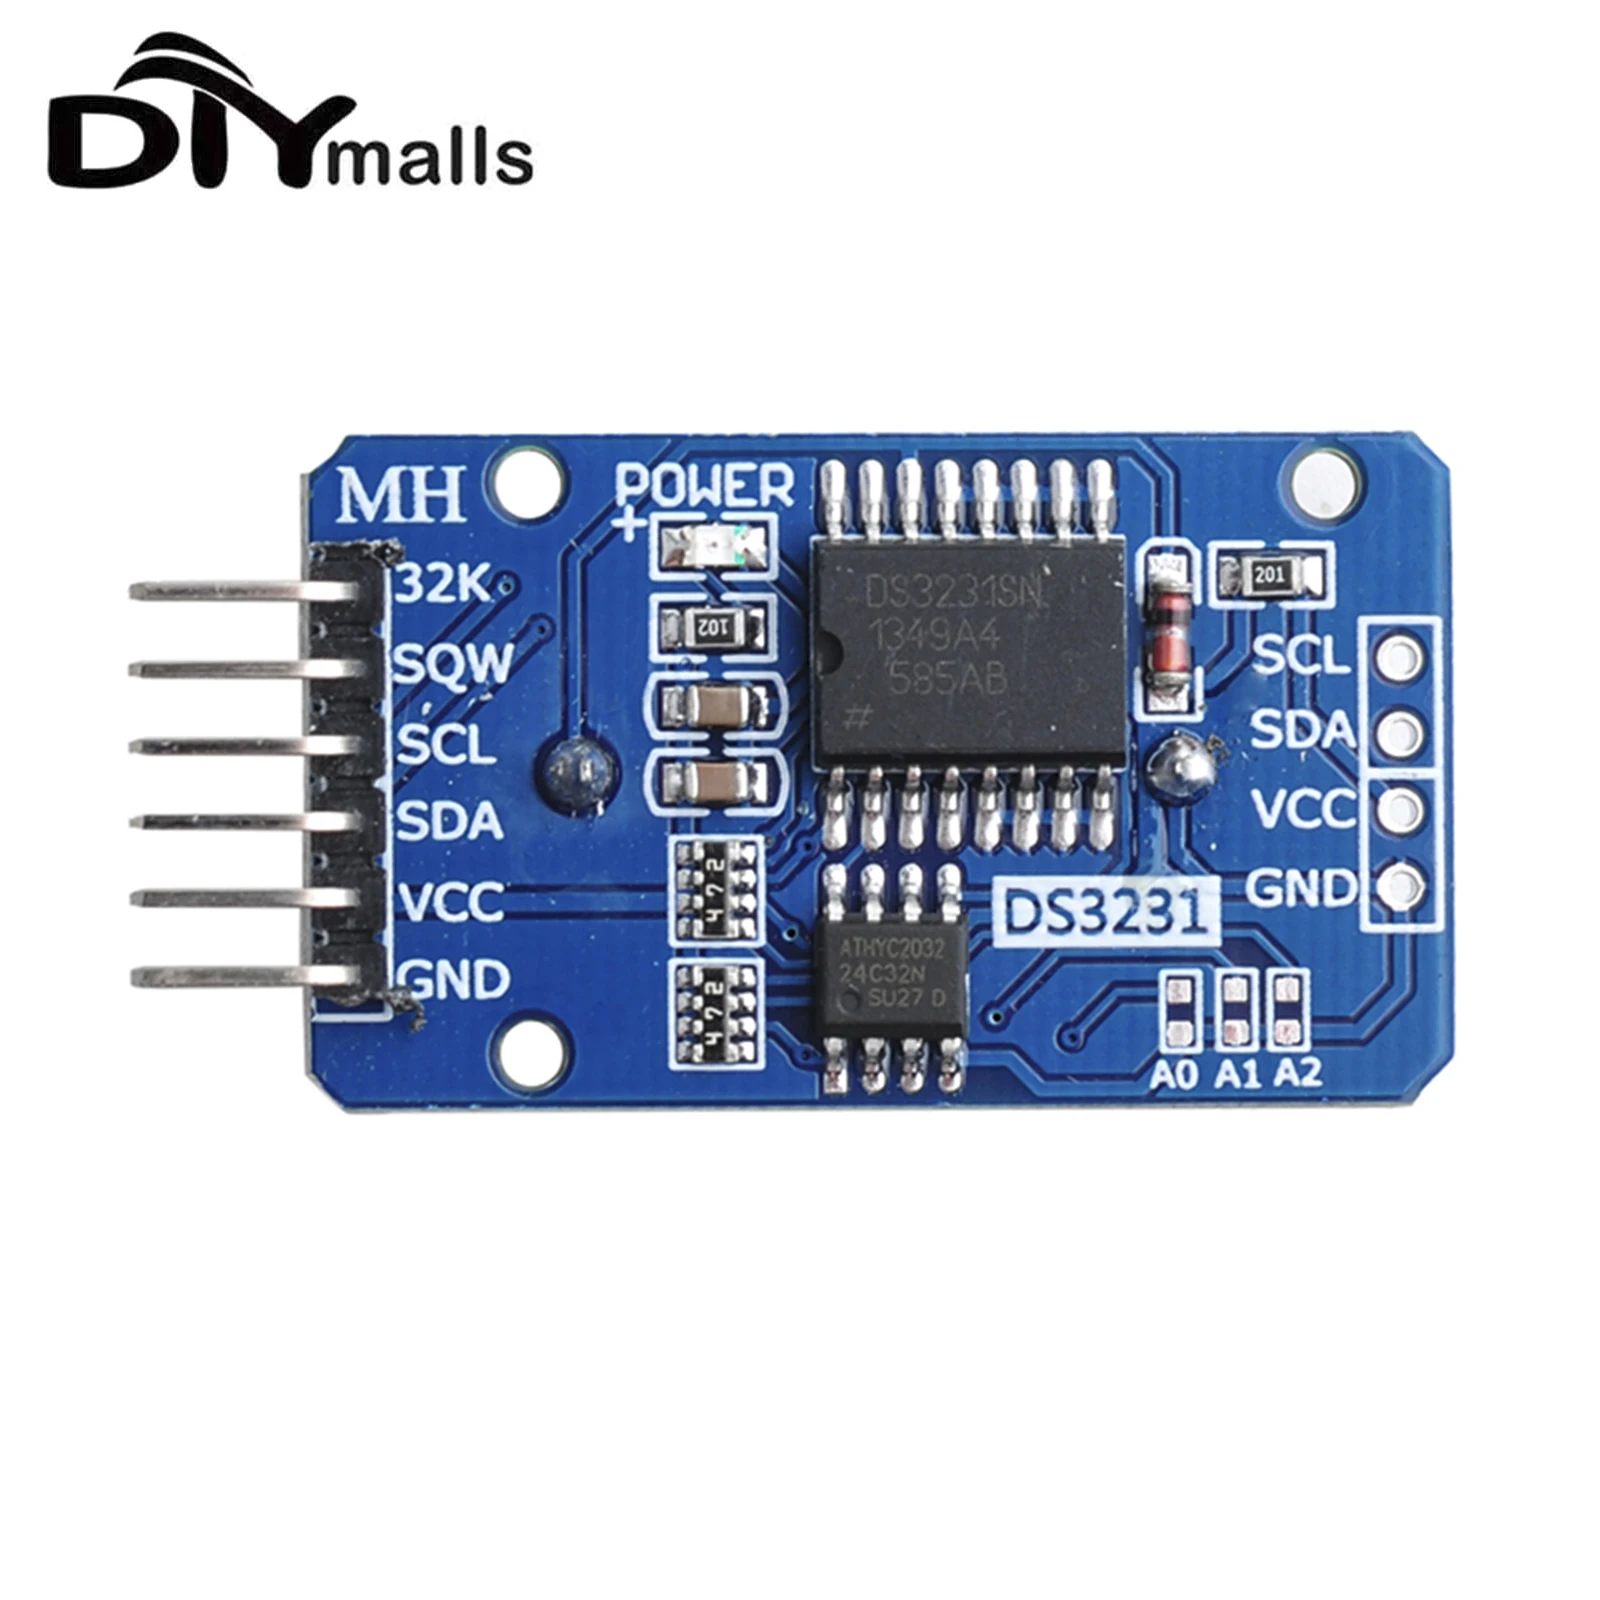 DS3231 AT24C32 IIC Module Precision Clock Module RTC DS3231SN Memory Module for Arduino (without battery) ds3231 at24c32 iic module precision clock module without battery ds3231sn memory module